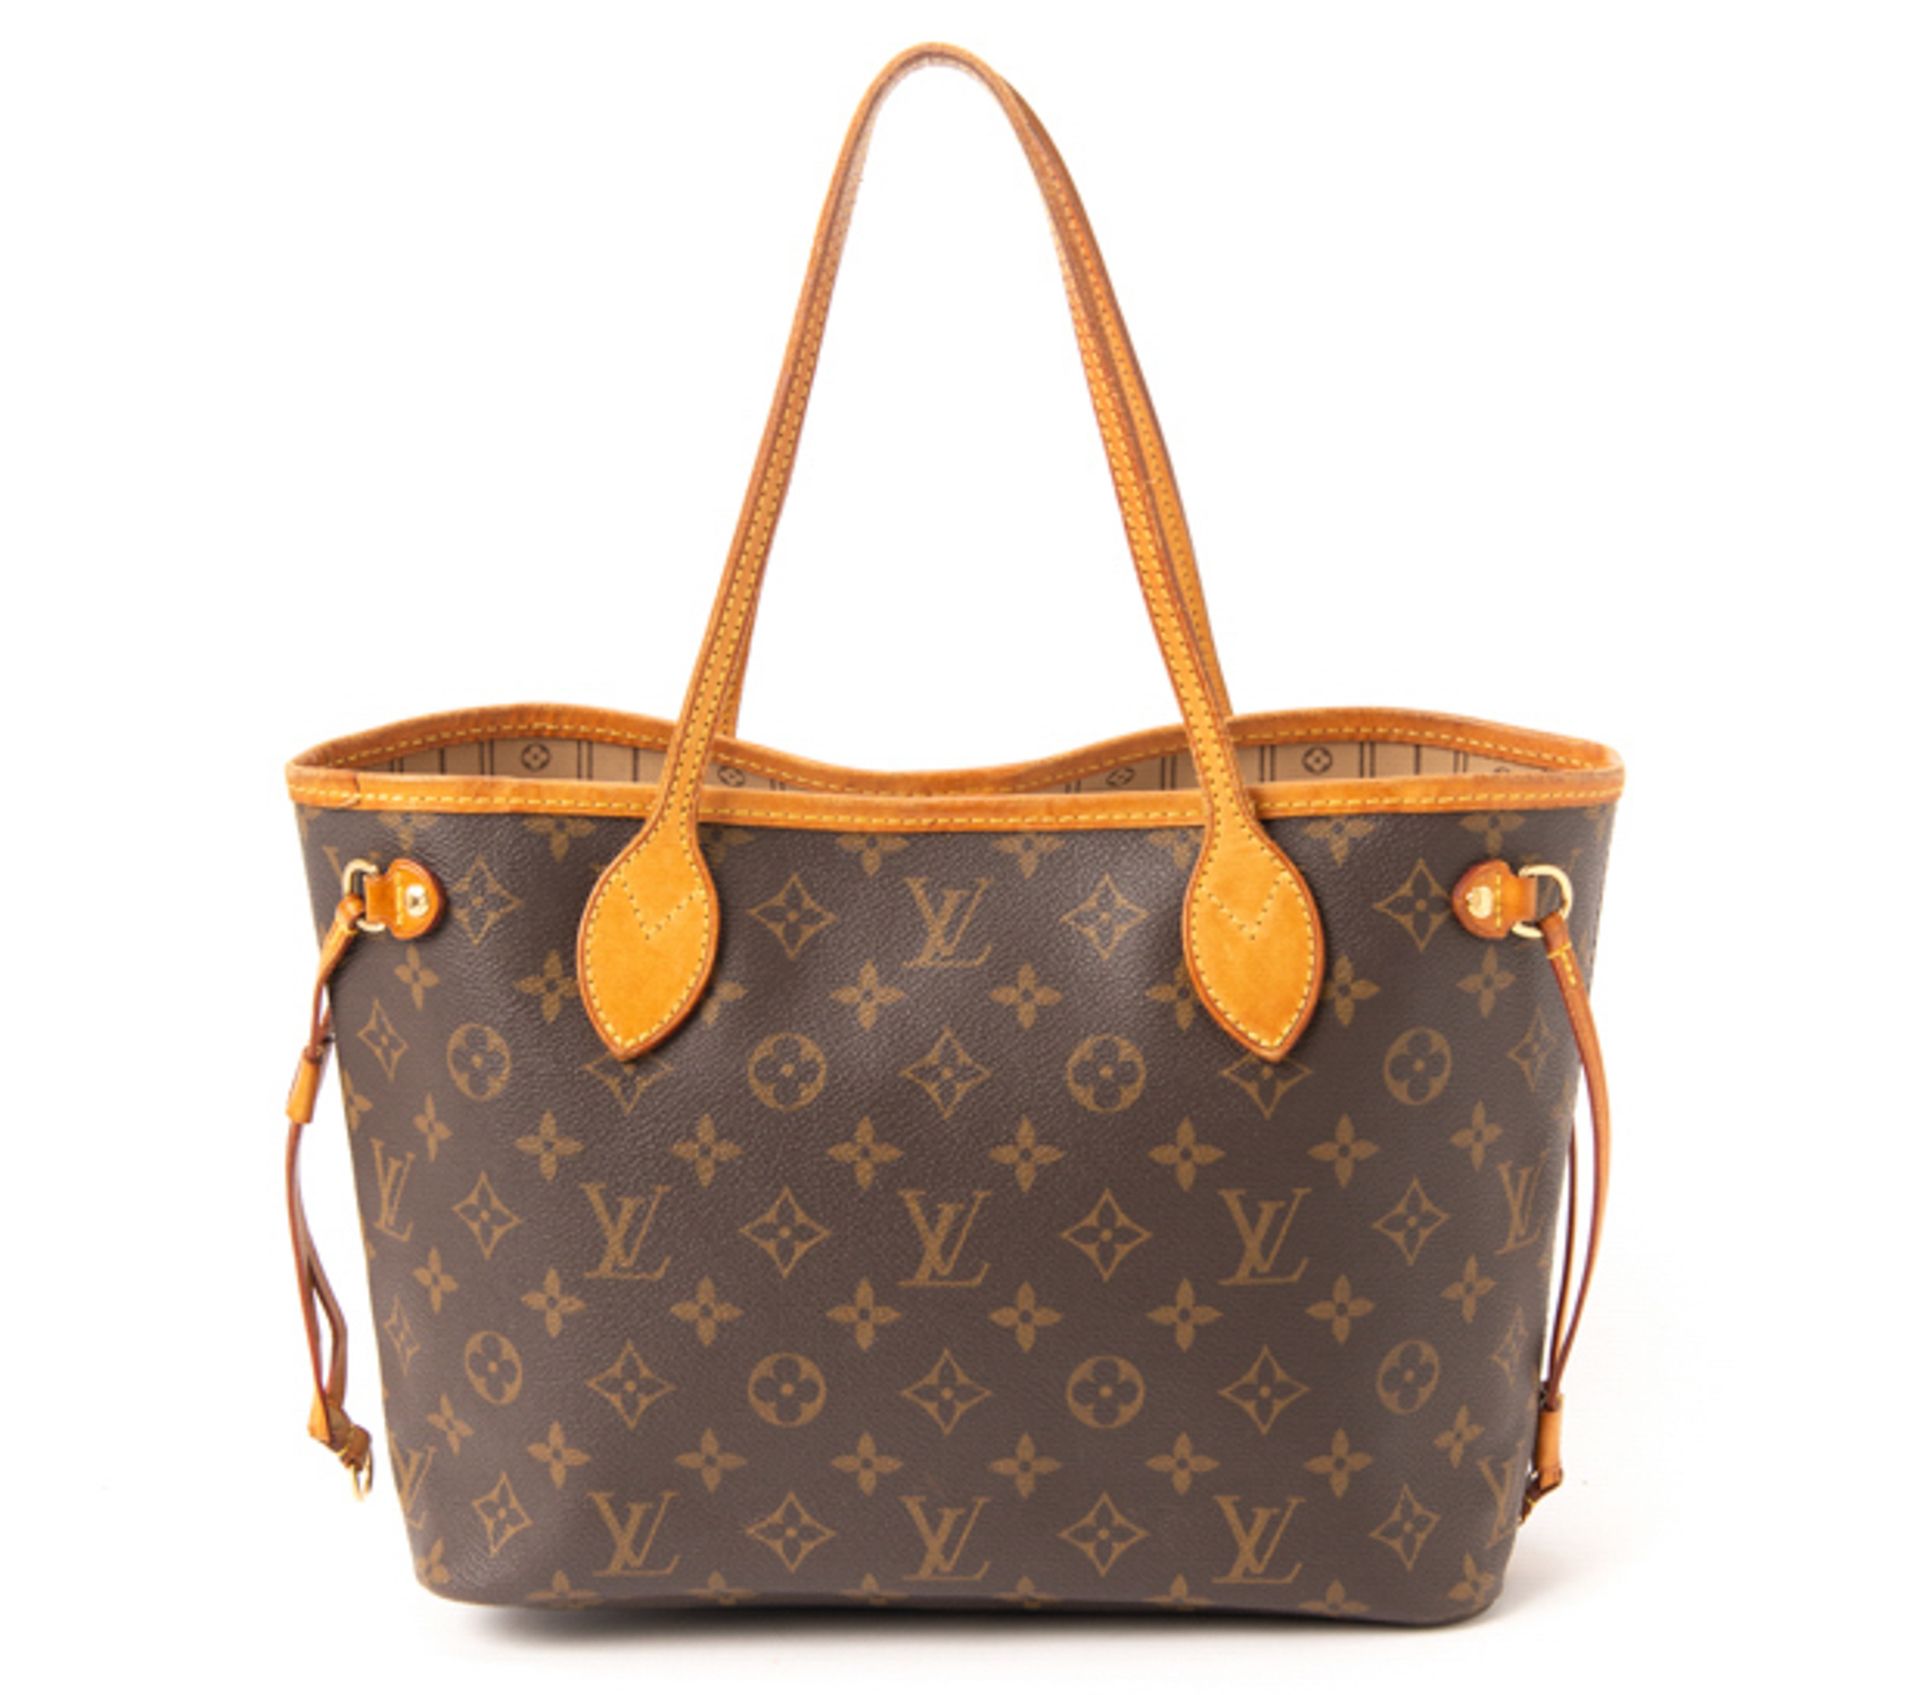 Buying a Classic Louis Vuitton Neverfull Just Got a Lot Harder